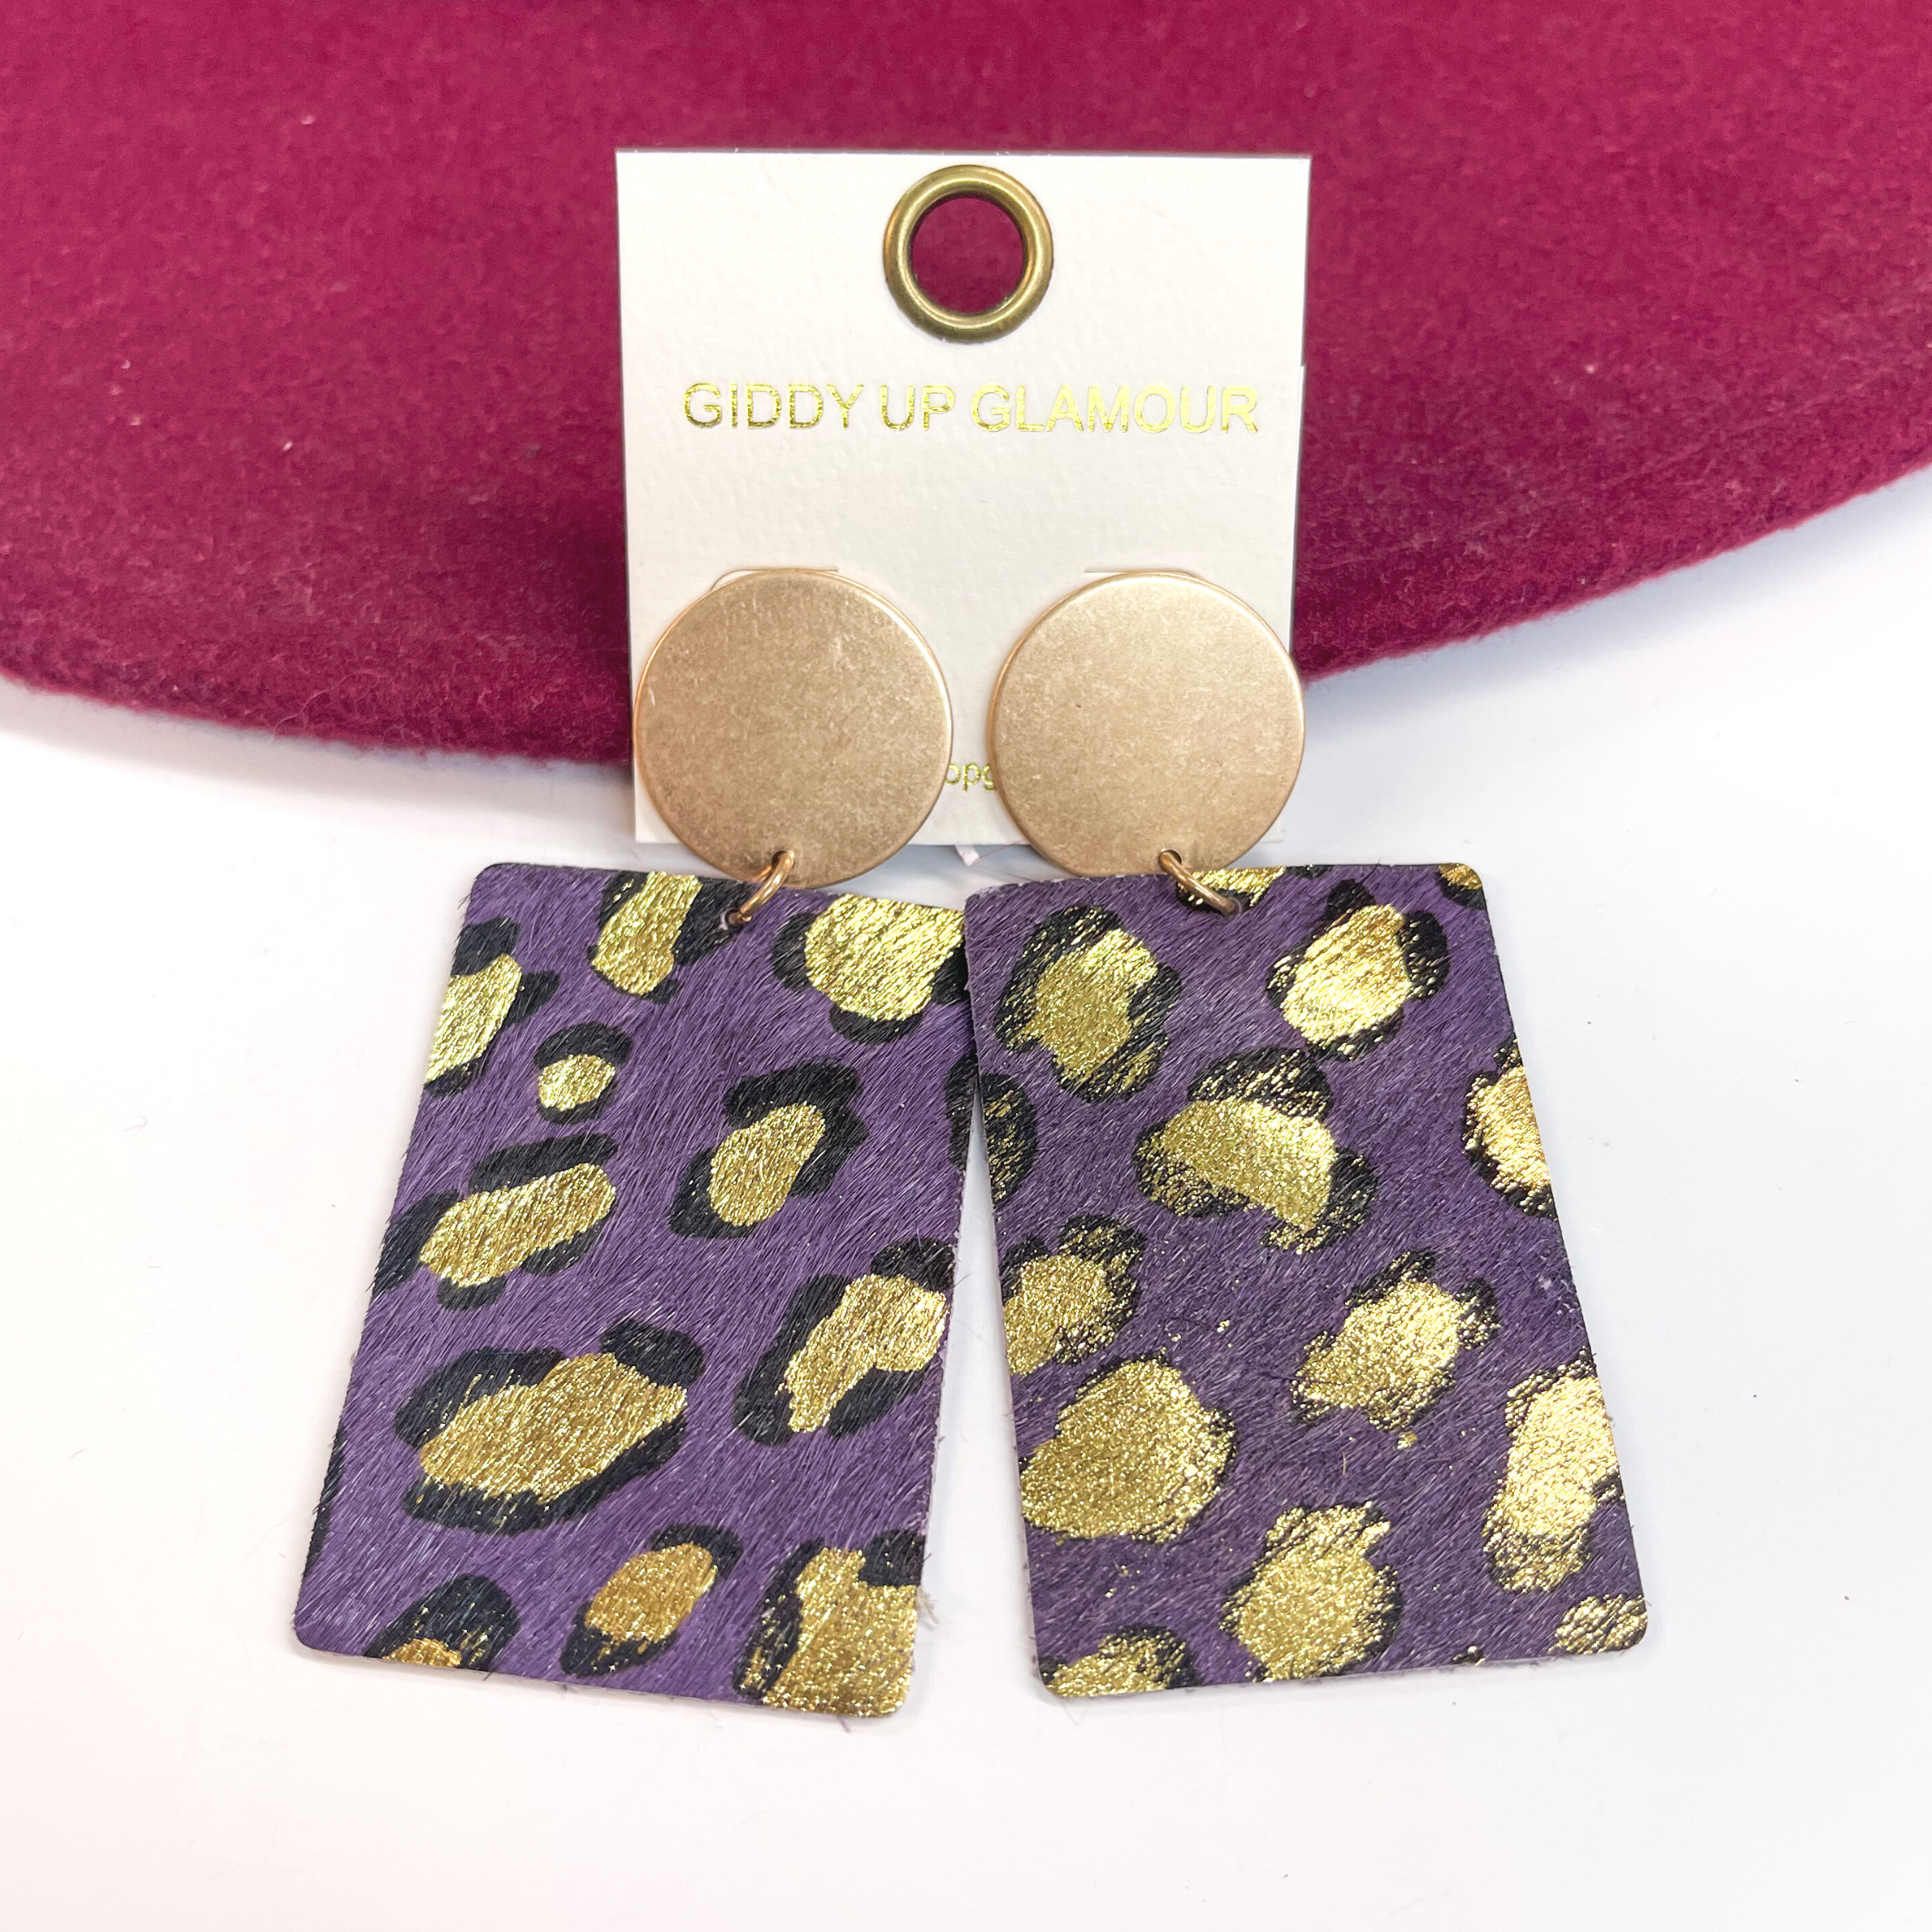 Gold circle stud earrings with black and gold leopard print on dark purple leather hide.  Taken on a white background and  leaned up against a burgundy hat.